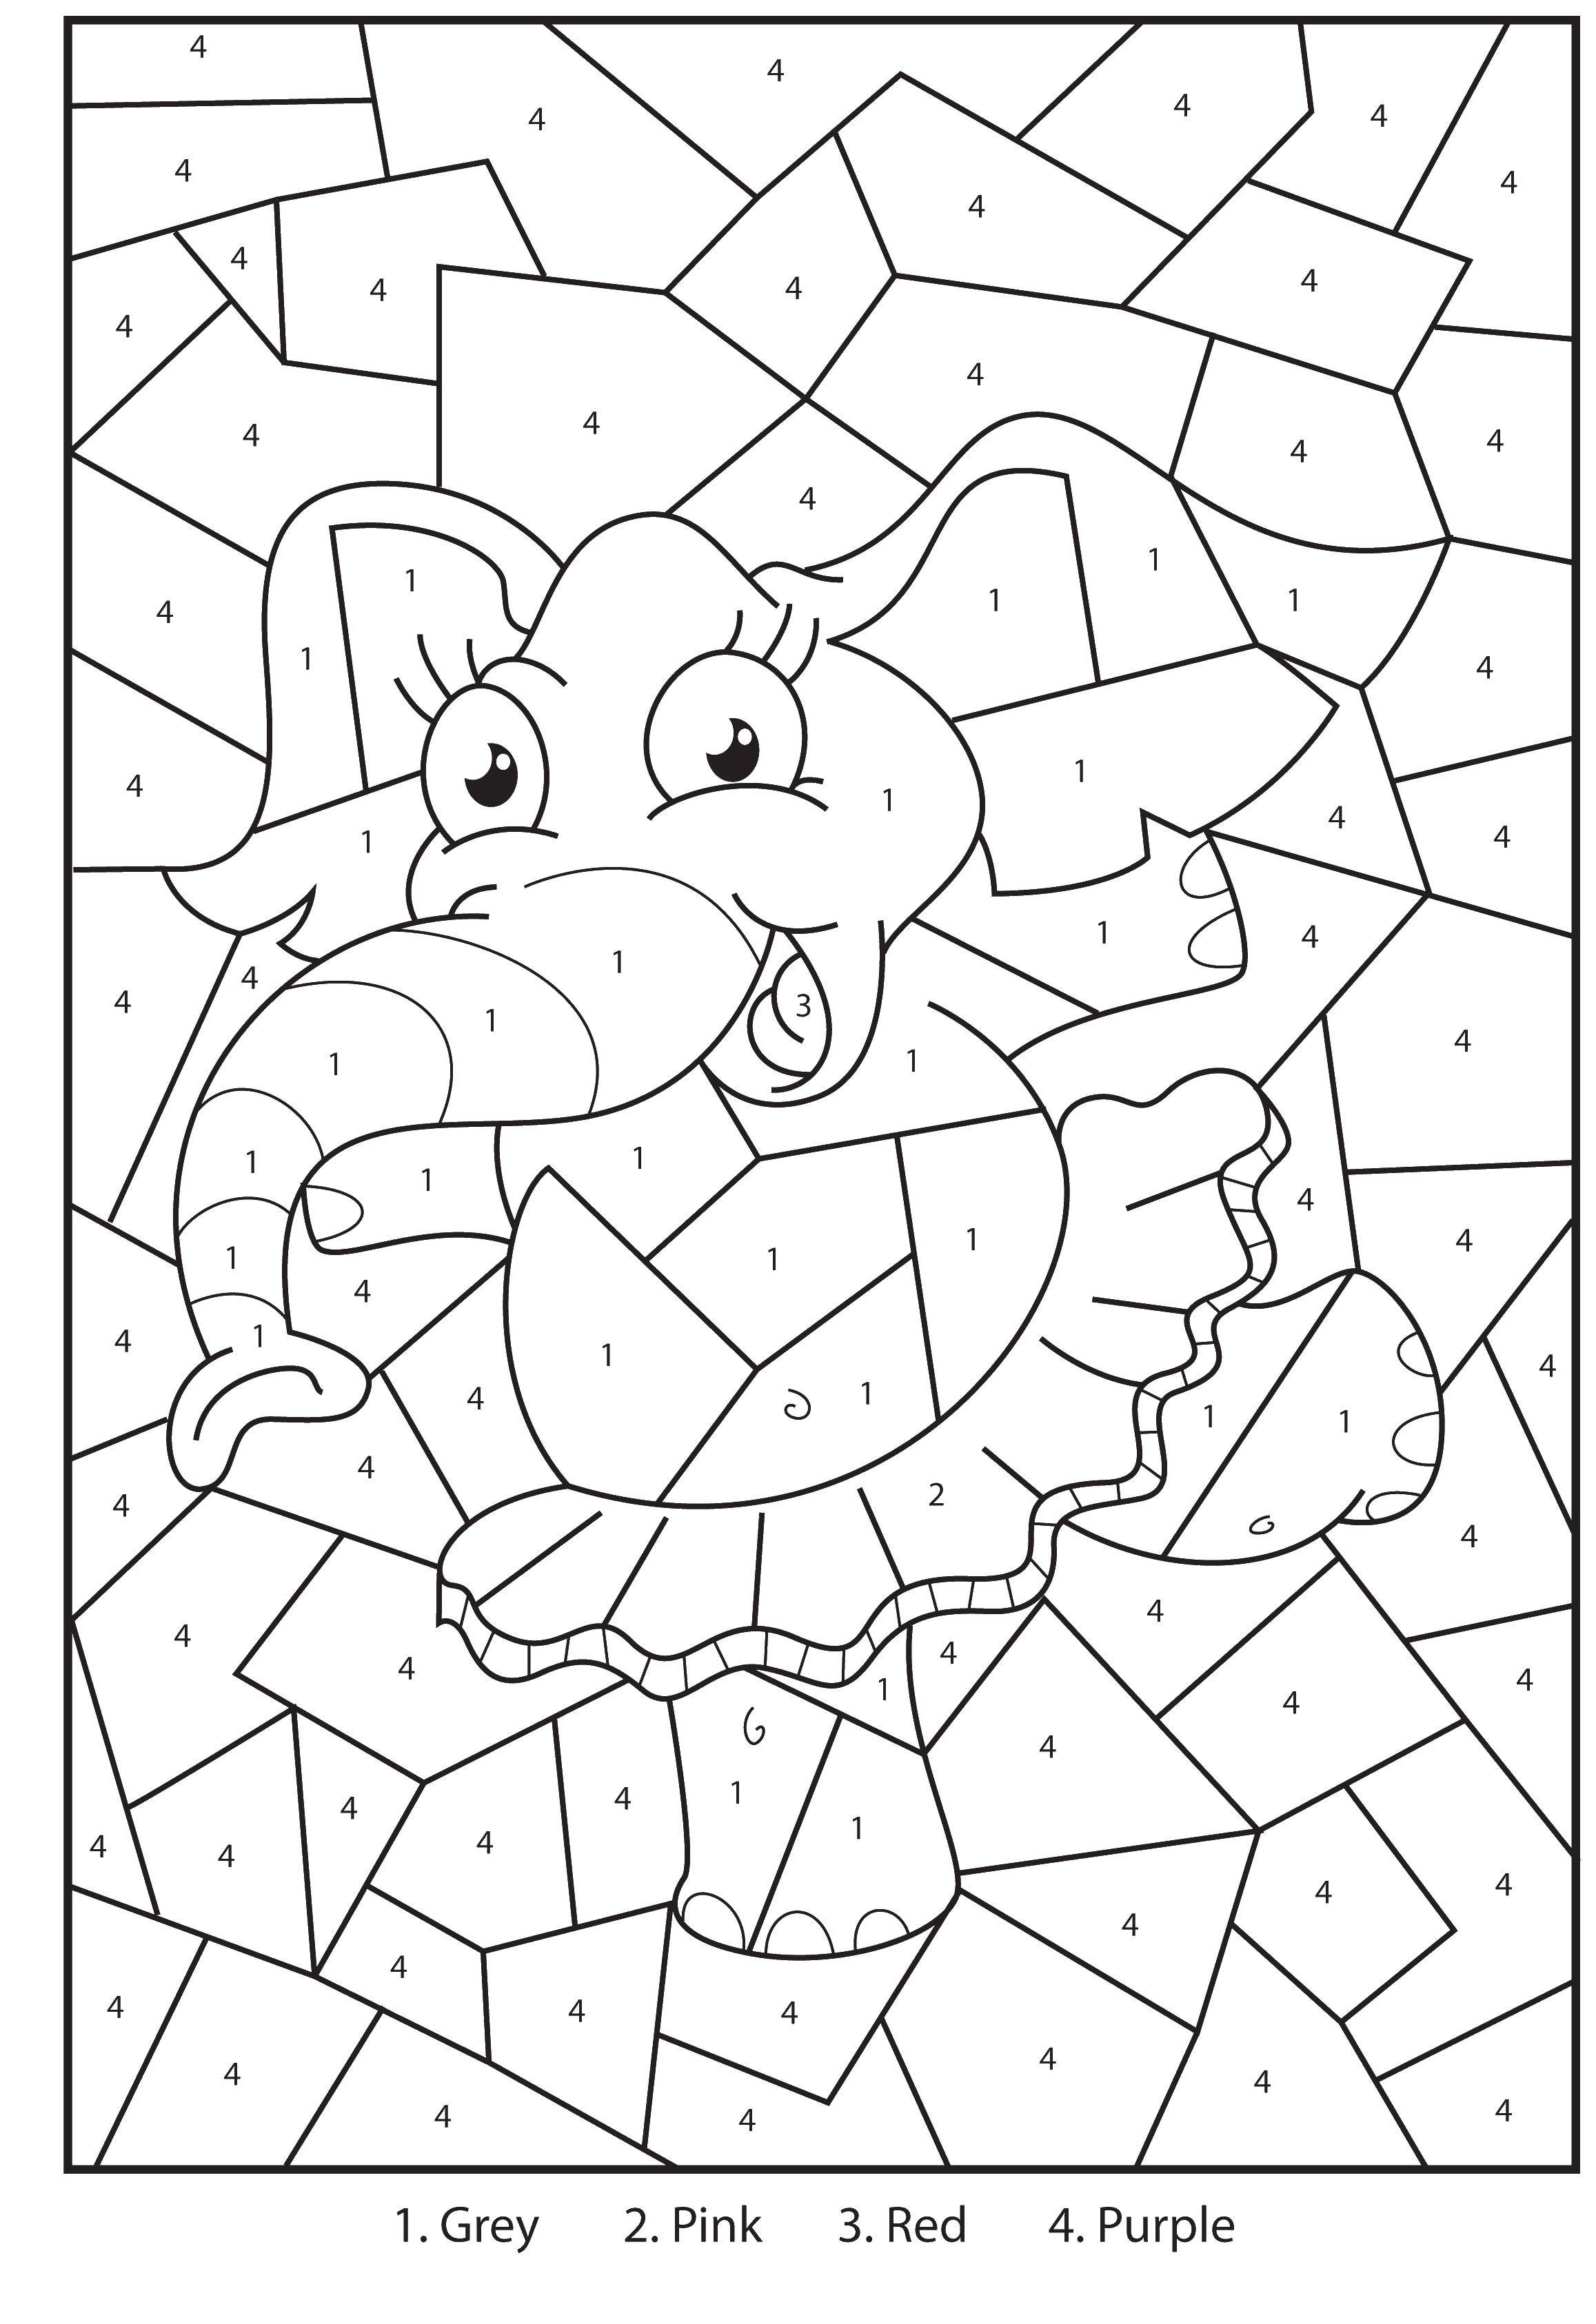 Coloring Elephant in a tutu. Category That number. Tags:  elephant, stack, trunk.